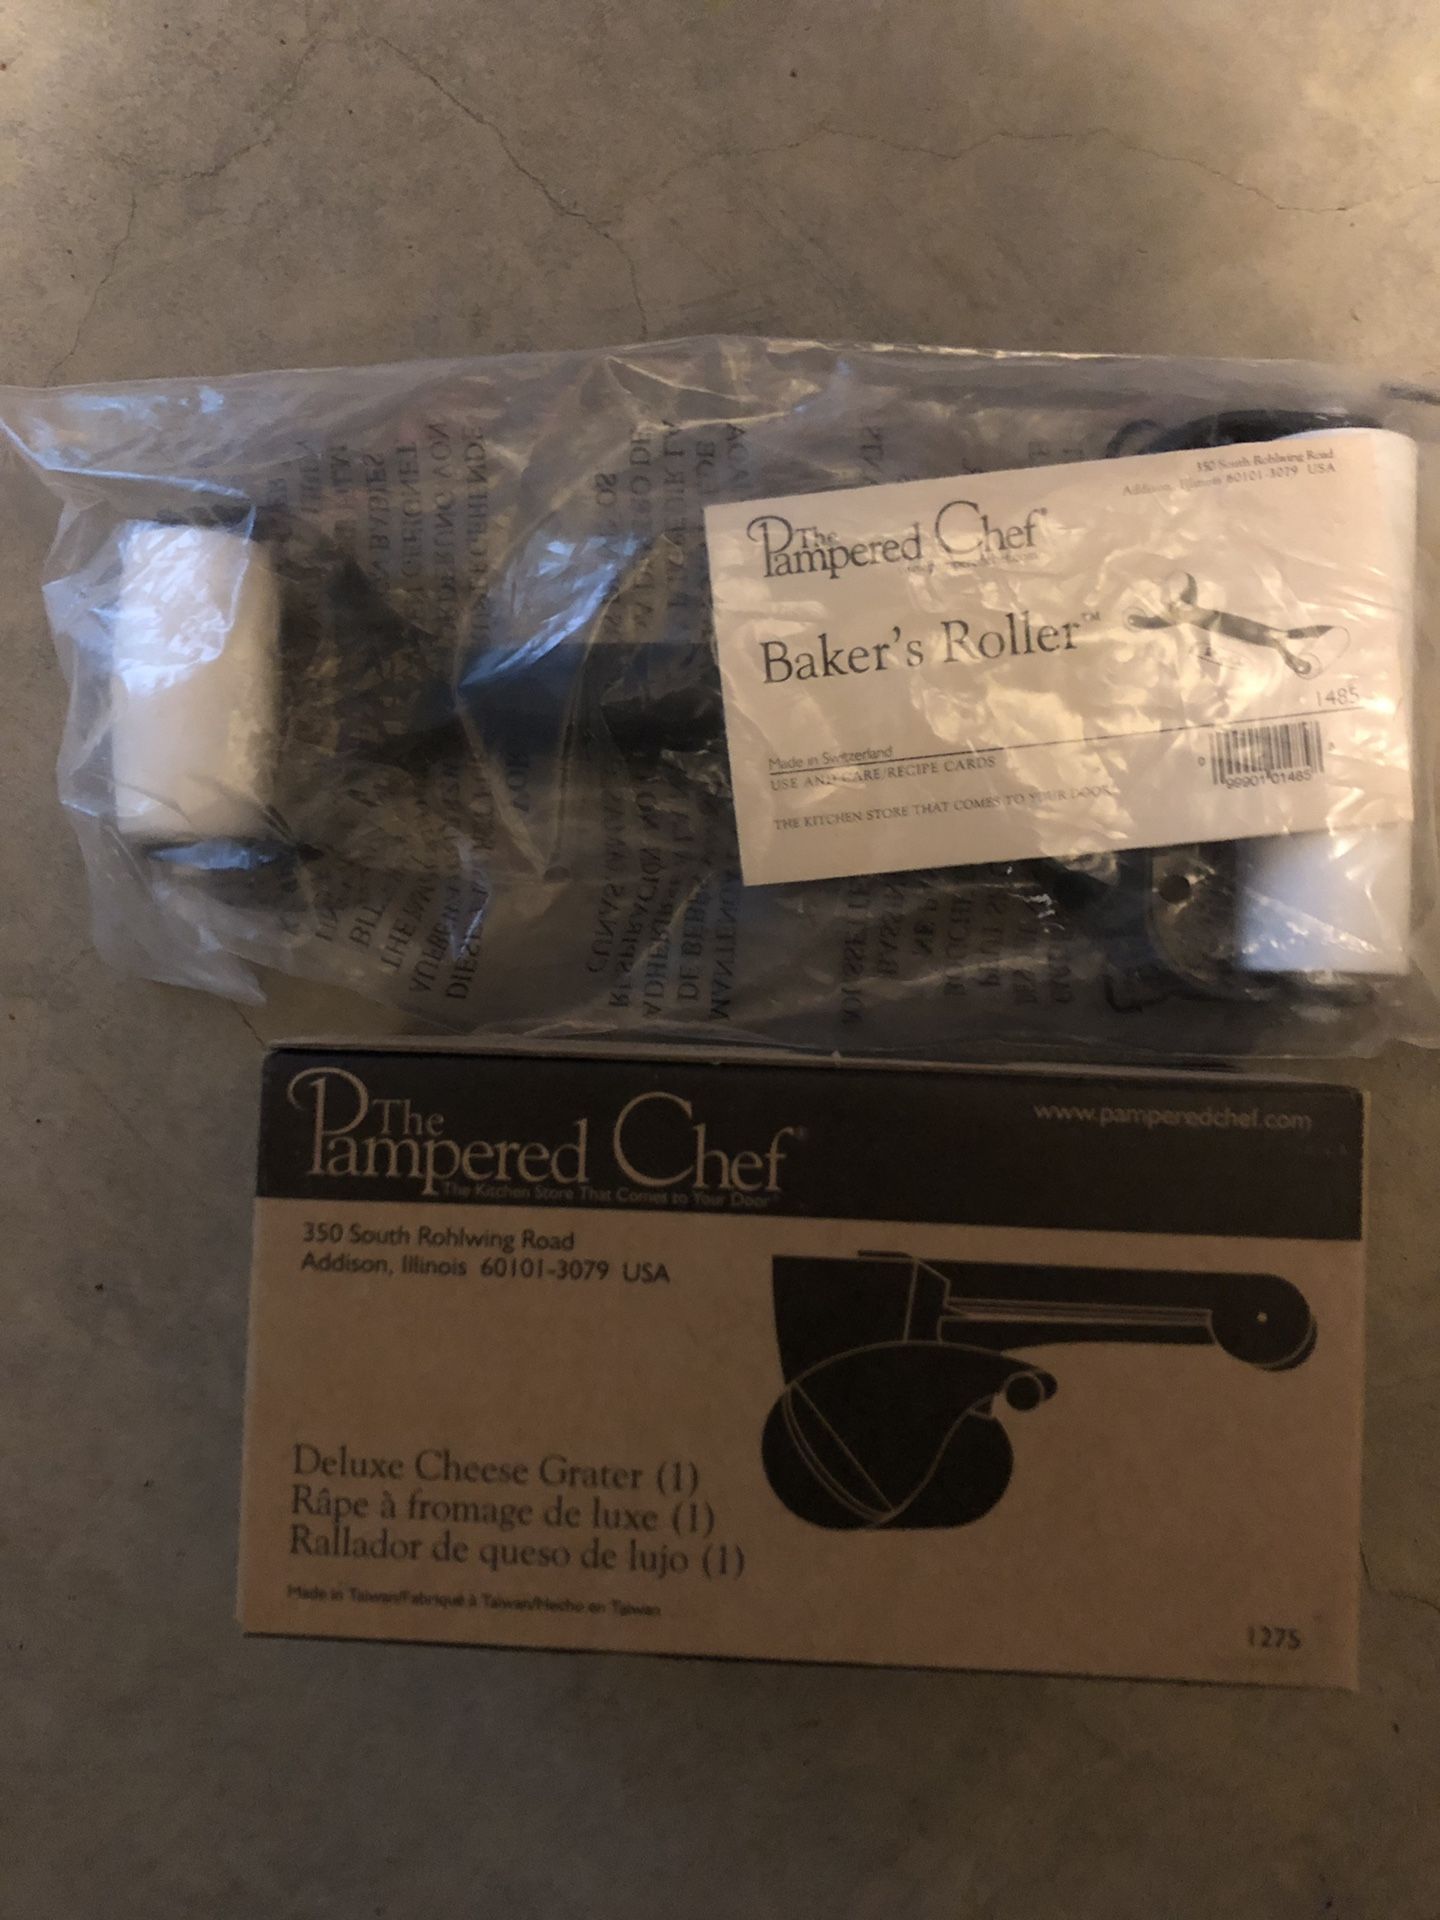 Brand new pampered chef - deluxe cheese grater and baker’s roller